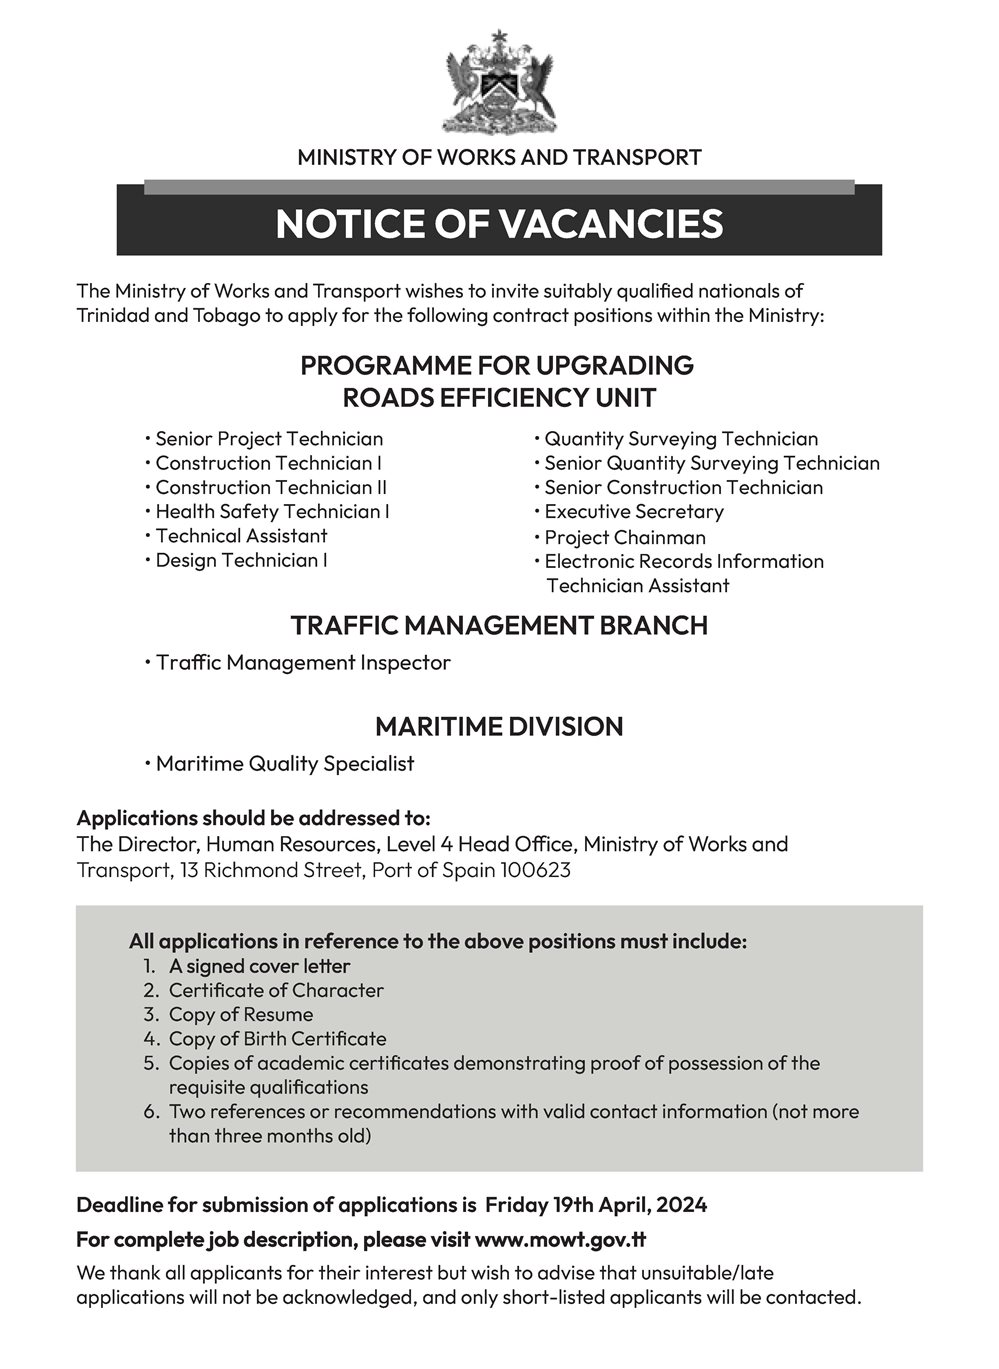 PROGRAMME-FOR-UPGRADING-ROADS-EFFICIENCY-UNIT-Vacancy-AD.jpg